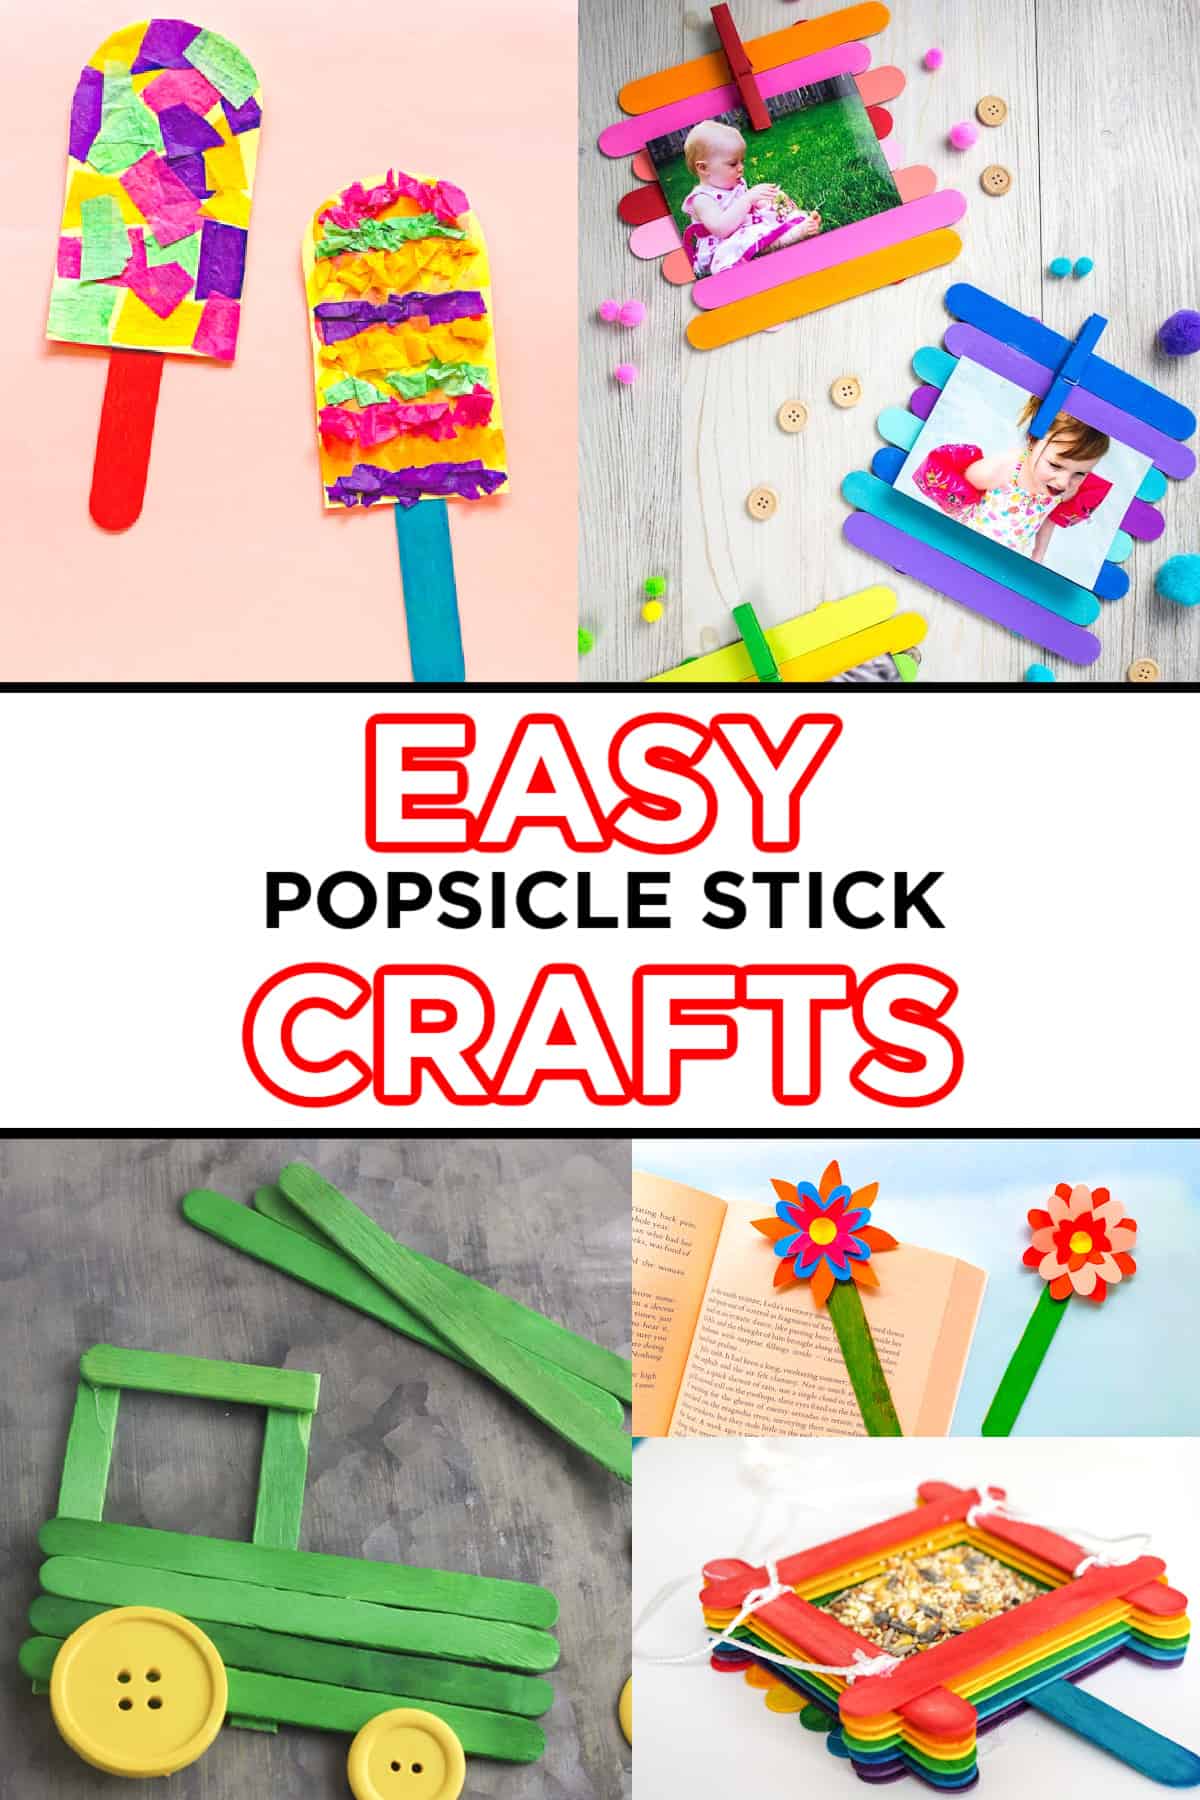 How to Make Modern Popsicle Sticks House - Building Popsicle Stick